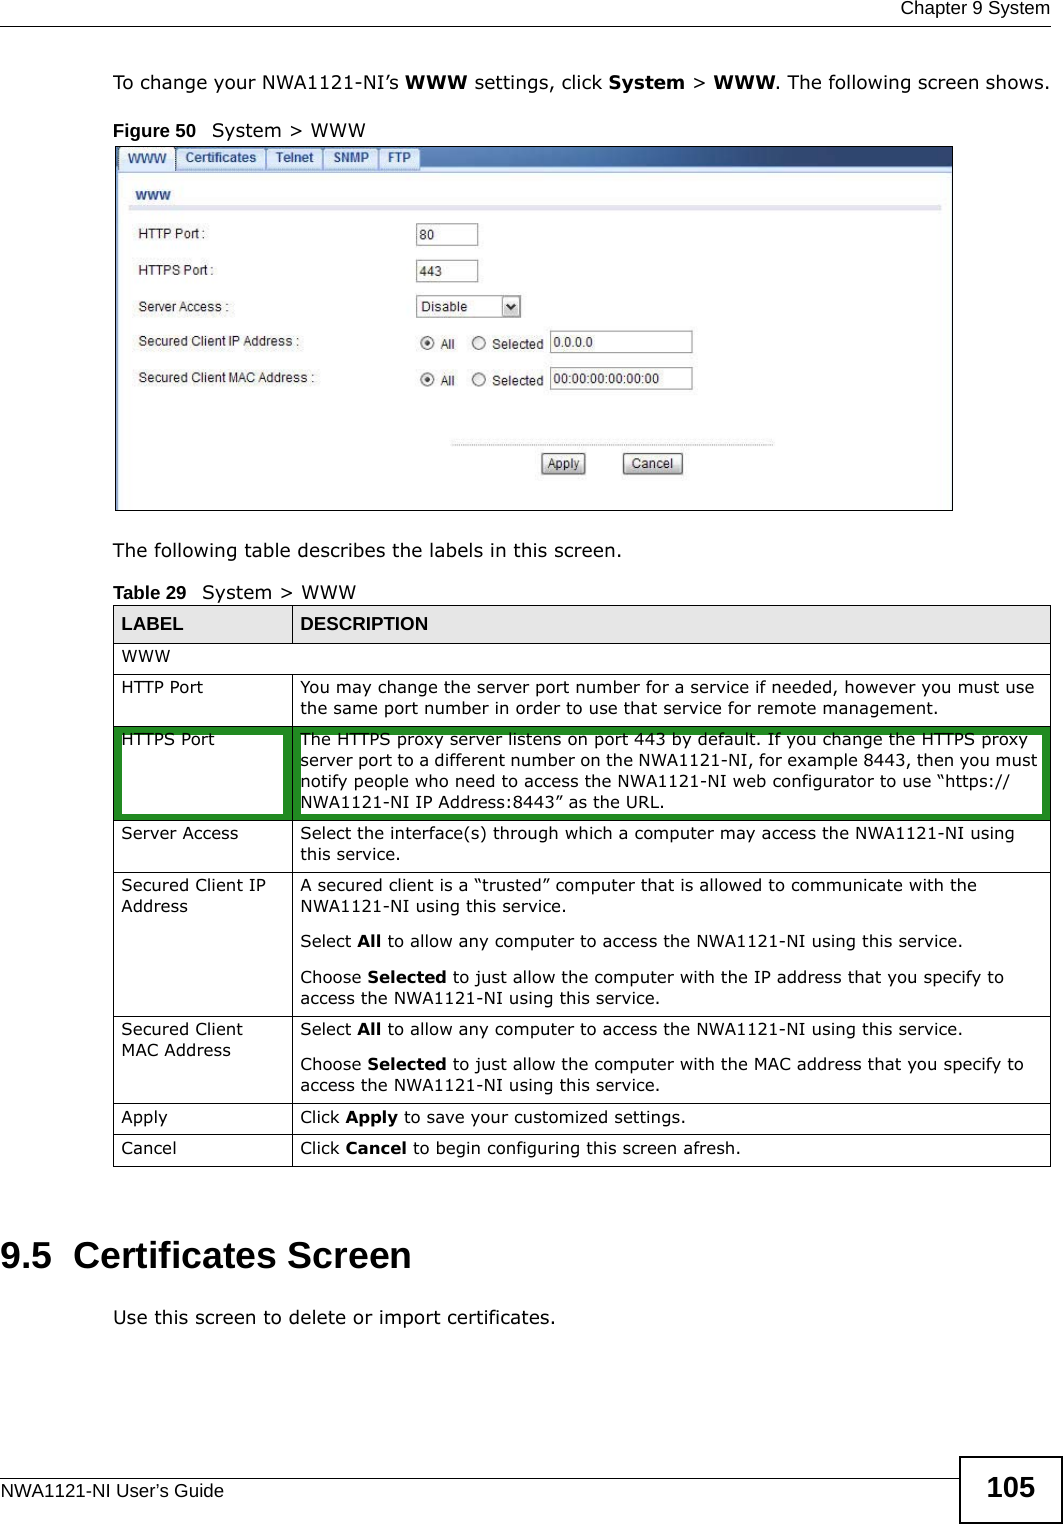  Chapter 9 SystemNWA1121-NI User’s Guide 105To change your NWA1121-NI’s WWW settings, click System &gt; WWW. The following screen shows.Figure 50   System &gt; WWWThe following table describes the labels in this screen.9.5  Certificates ScreenUse this screen to delete or import certificates.Table 29   System &gt; WWWLABEL DESCRIPTIONWWWHTTP Port You may change the server port number for a service if needed, however you must use the same port number in order to use that service for remote management.HTTPS Port The HTTPS proxy server listens on port 443 by default. If you change the HTTPS proxy server port to a different number on the NWA1121-NI, for example 8443, then you must notify people who need to access the NWA1121-NI web configurator to use “https://NWA1121-NI IP Address:8443” as the URL.Server Access Select the interface(s) through which a computer may access the NWA1121-NI using this service.Secured Client IP AddressA secured client is a “trusted” computer that is allowed to communicate with the NWA1121-NI using this service. Select All to allow any computer to access the NWA1121-NI using this service.Choose Selected to just allow the computer with the IP address that you specify to access the NWA1121-NI using this service.Secured Client MAC AddressSelect All to allow any computer to access the NWA1121-NI using this service.Choose Selected to just allow the computer with the MAC address that you specify to access the NWA1121-NI using this service.Apply Click Apply to save your customized settings. Cancel Click Cancel to begin configuring this screen afresh.